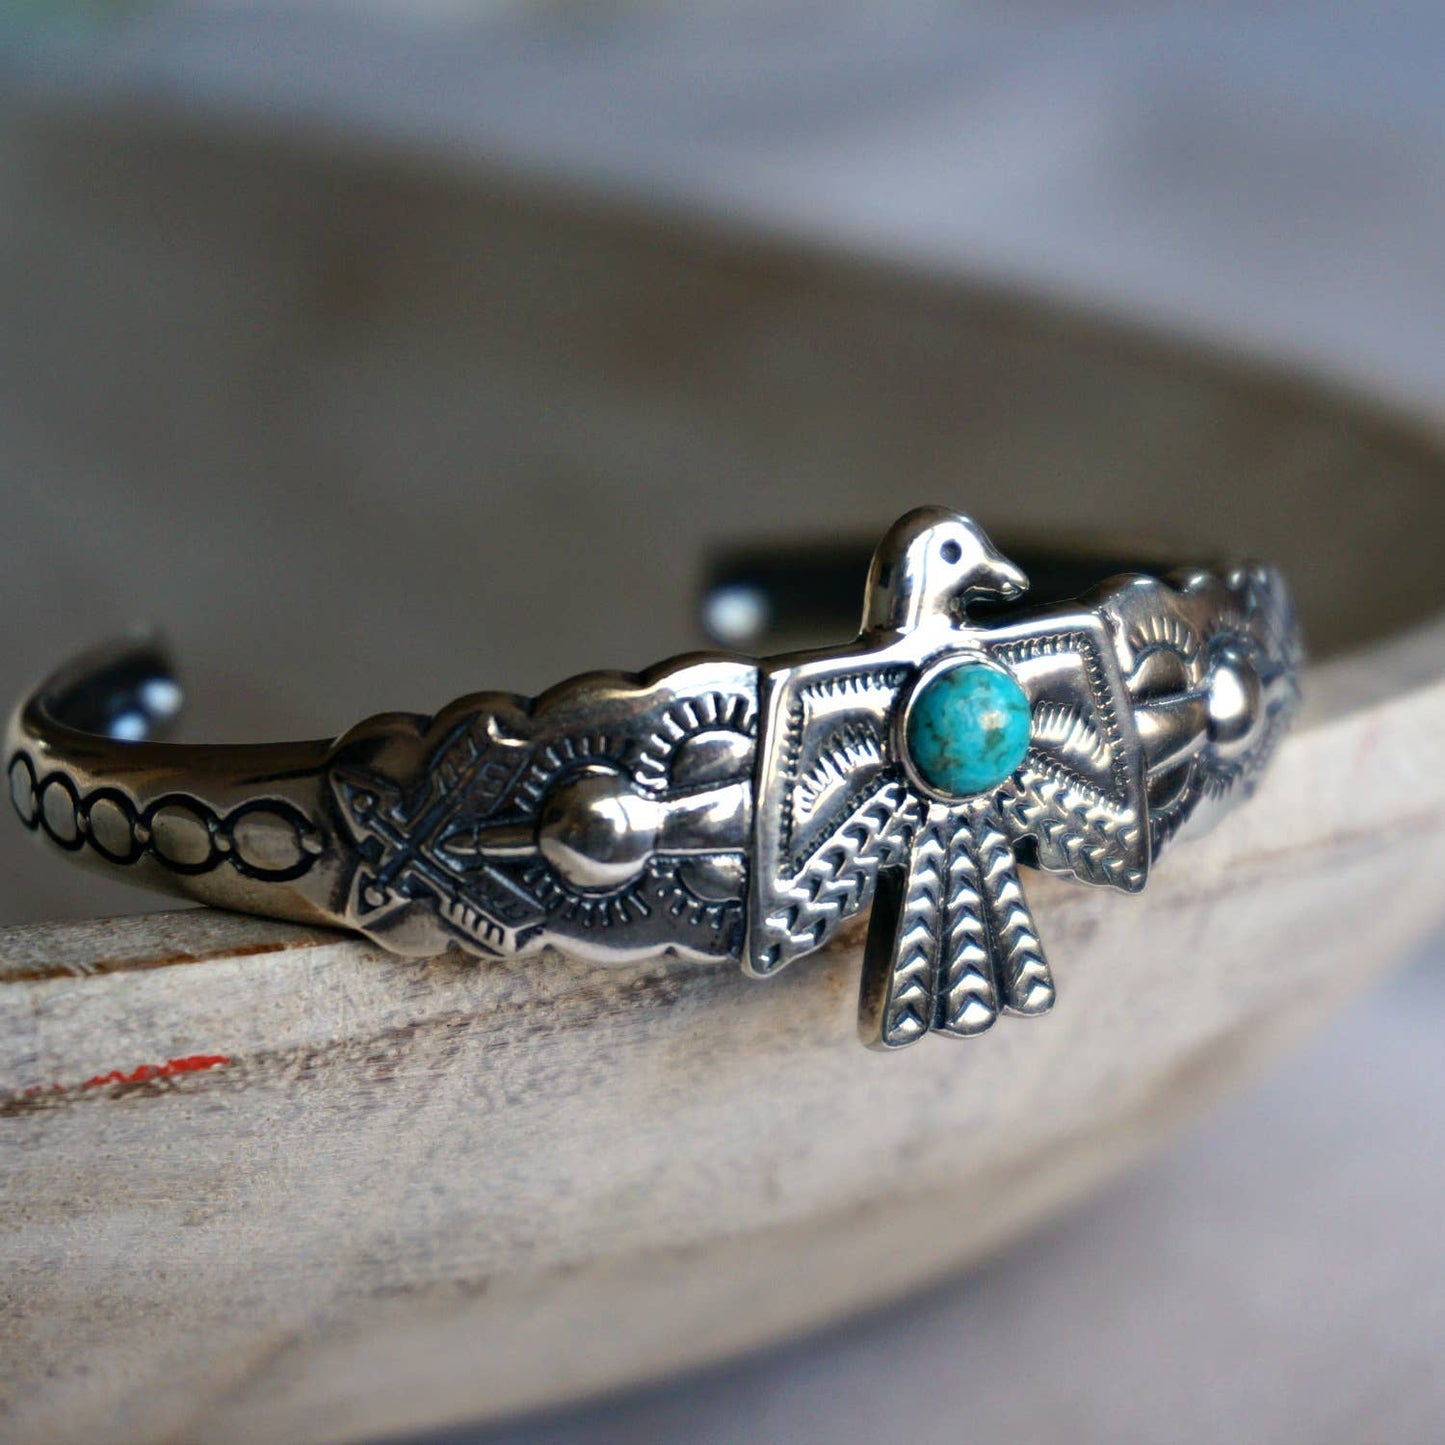 Slim detailed Sterling silver cuff w/ Thunderbird design and one Turquoise stone inlay set against a grey background